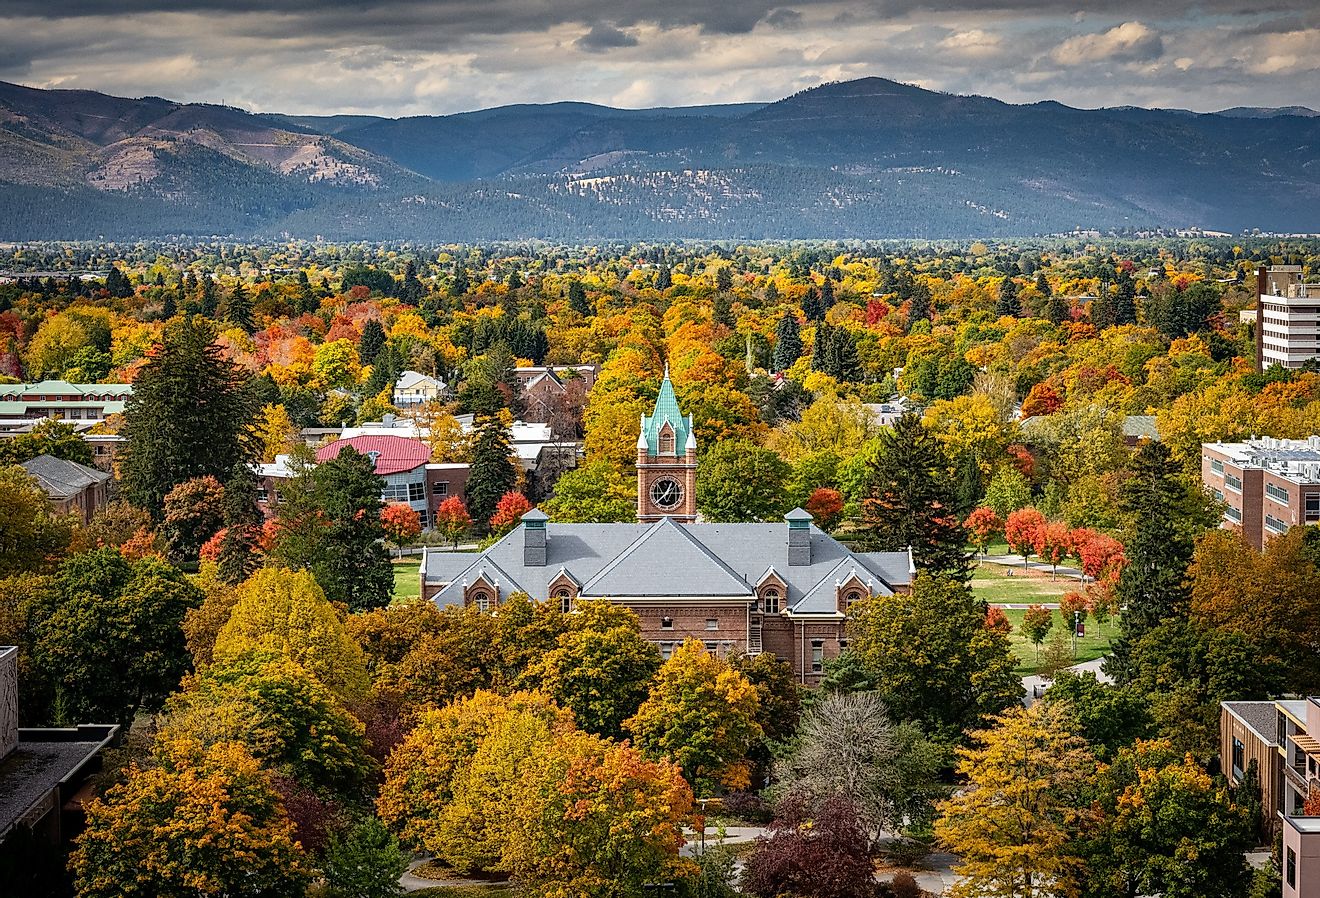 View of UM bell tower from Mount Sentinel in Missoula, Montana.